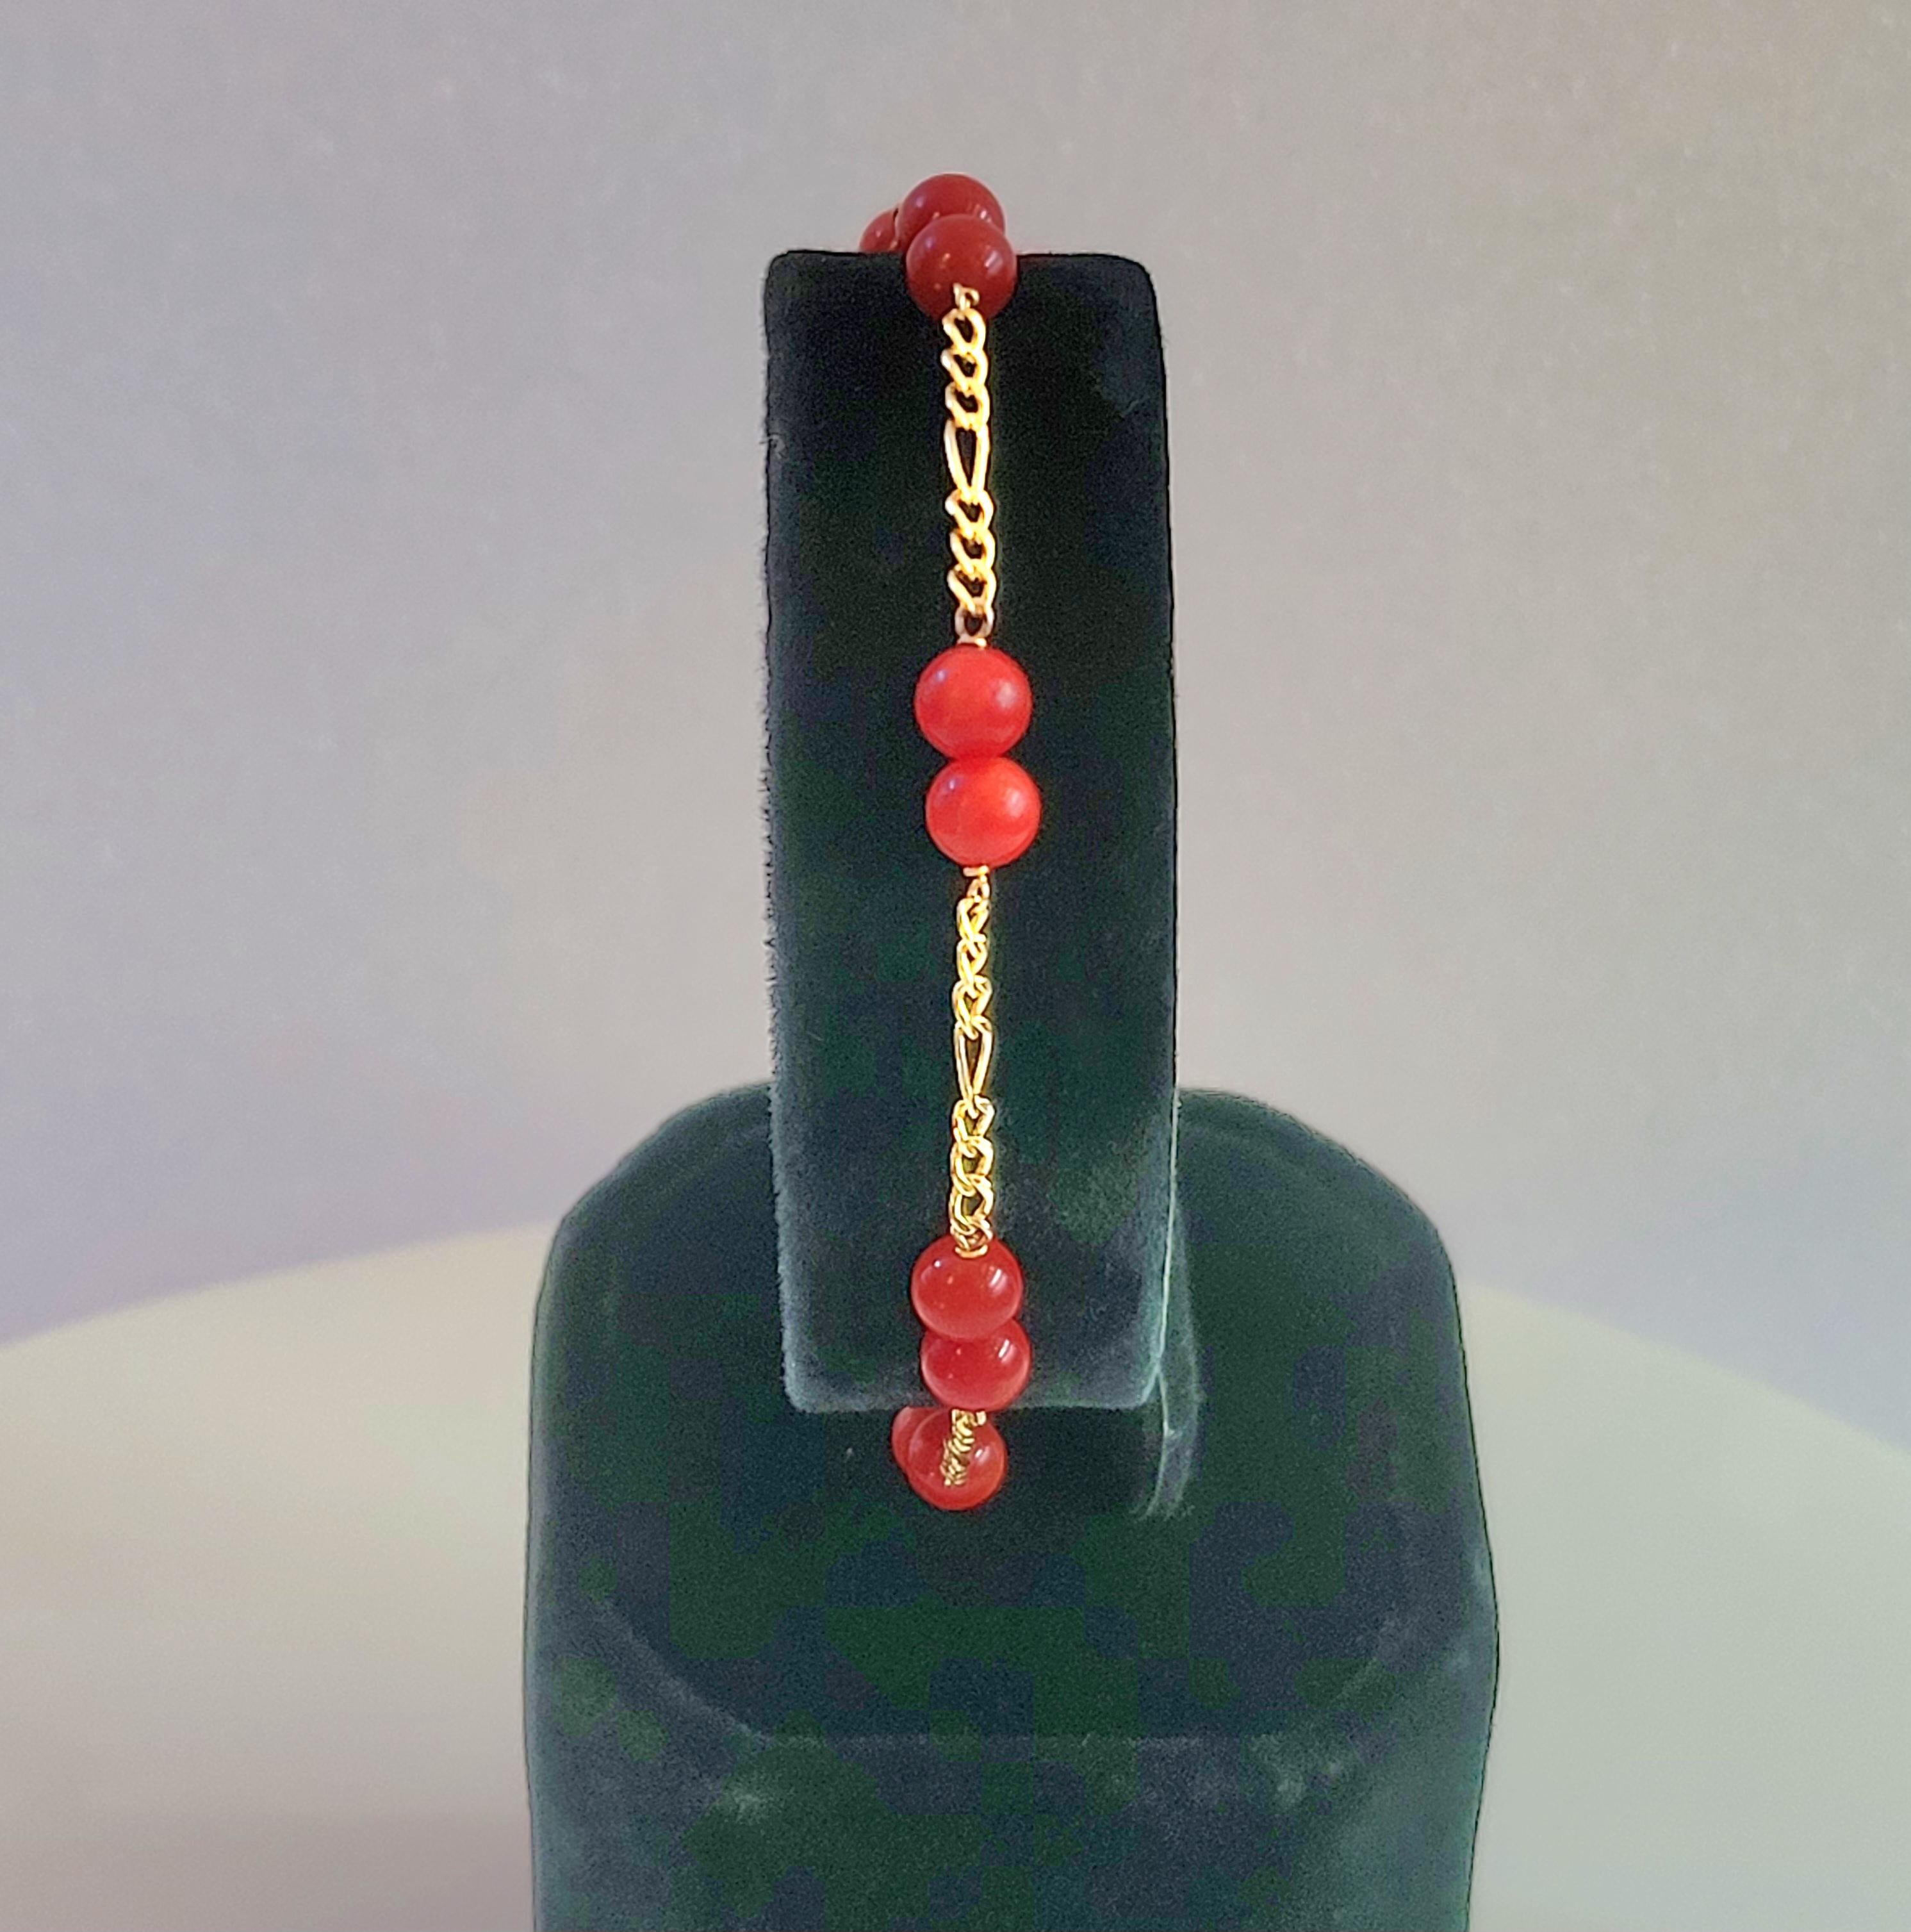 Unbranded Bead Bracelet 
Material 14K yellow gold
Coral Red Beads 4.8mm
Bracelet Length 8.5''mm
Bracelet Weight 3.2gr 
Gender women
Condition new, never worn 
Retail Price:$ 900